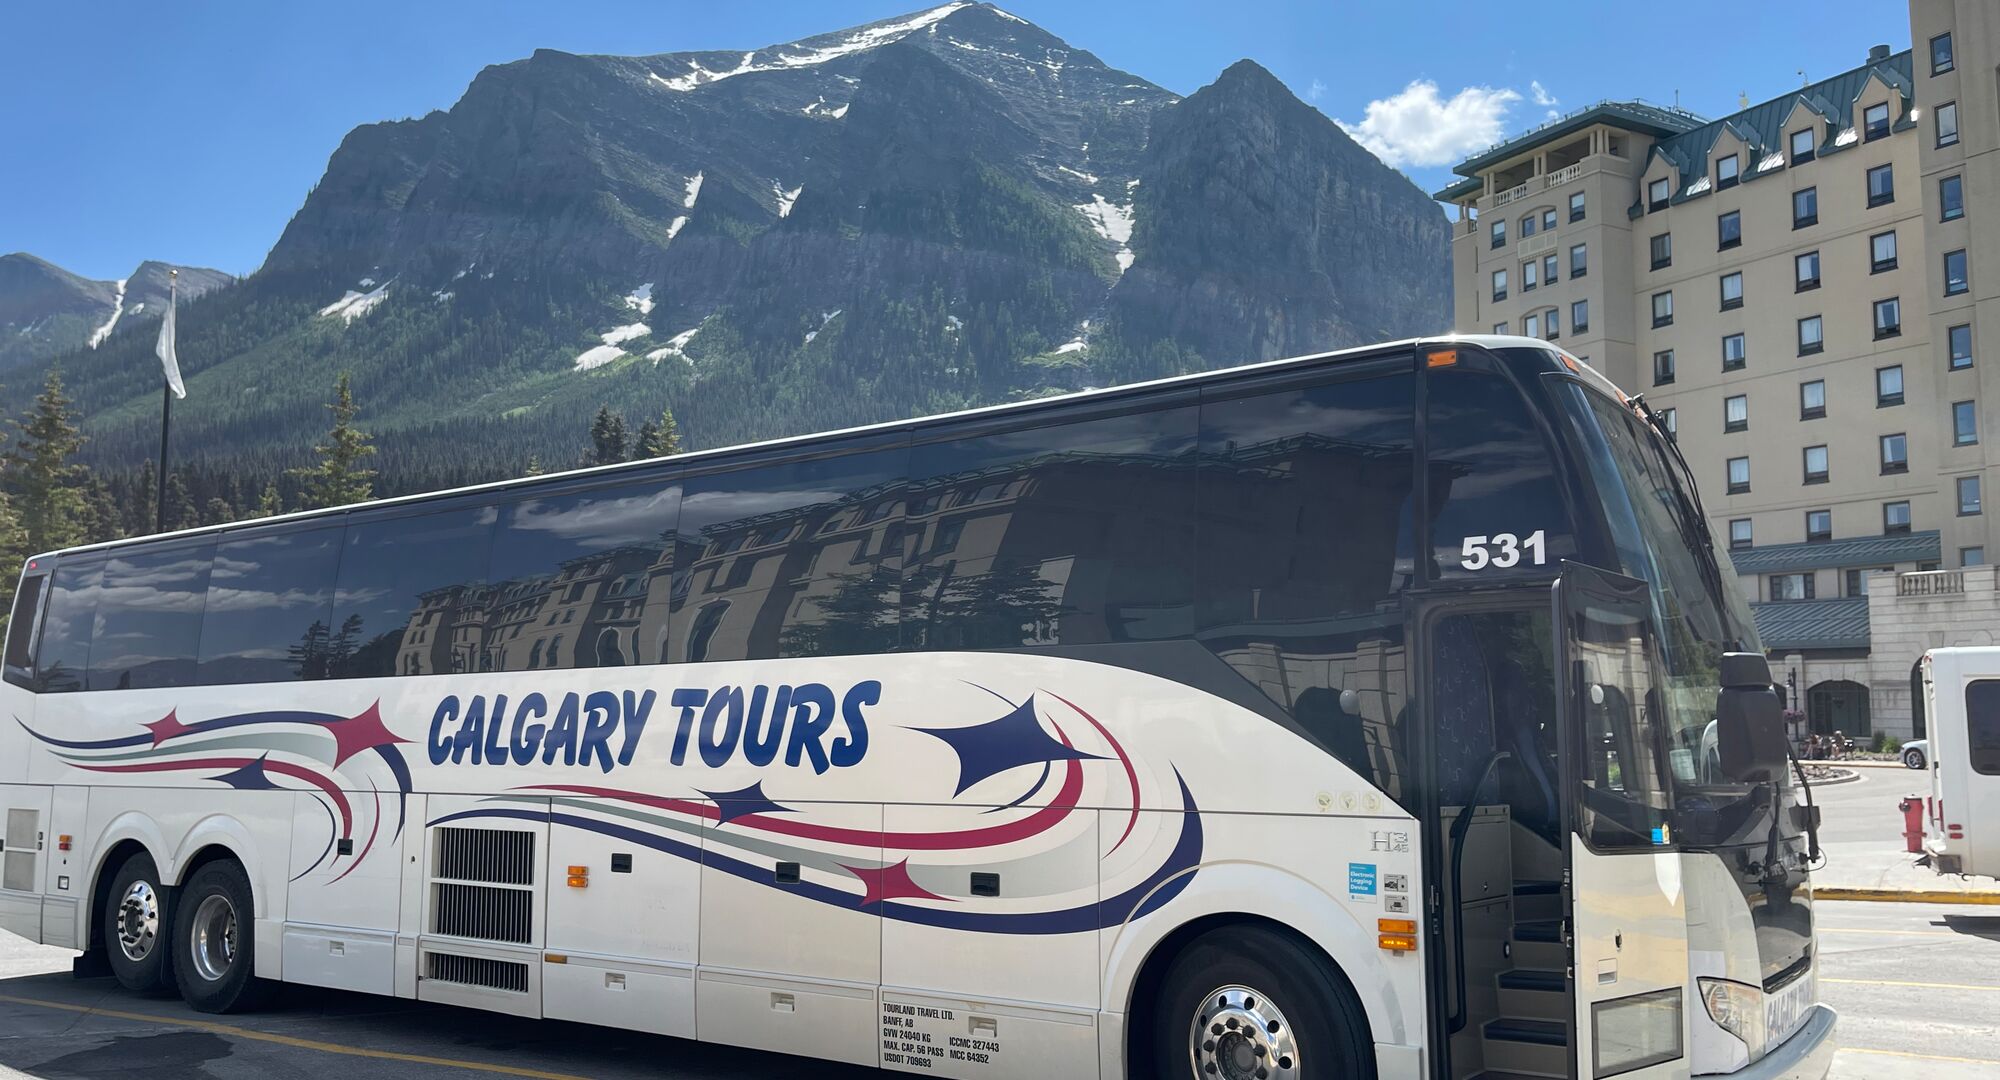 Calgary Tours (A division of Tourland Travel Ltd.) in Summer